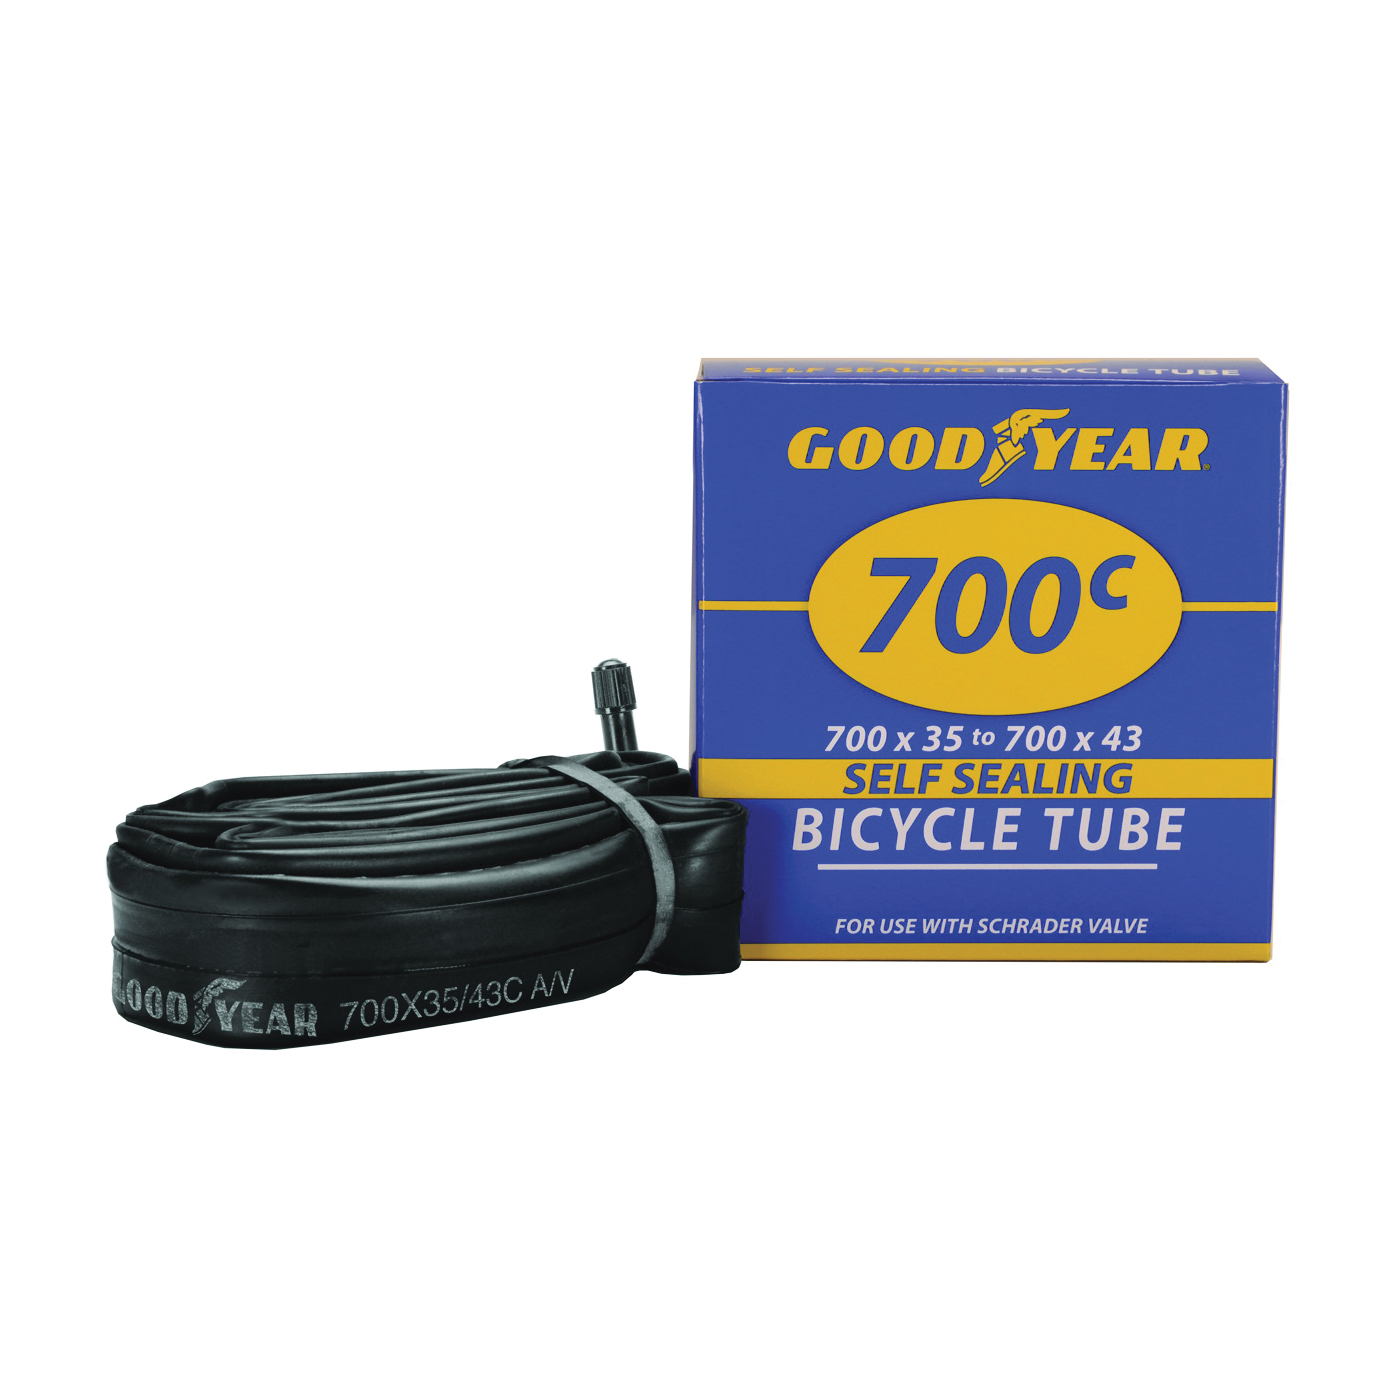 95203 Bicycle Tube, Self-Sealing, For: 700c x 35 to 43 in W Bicycle Tires